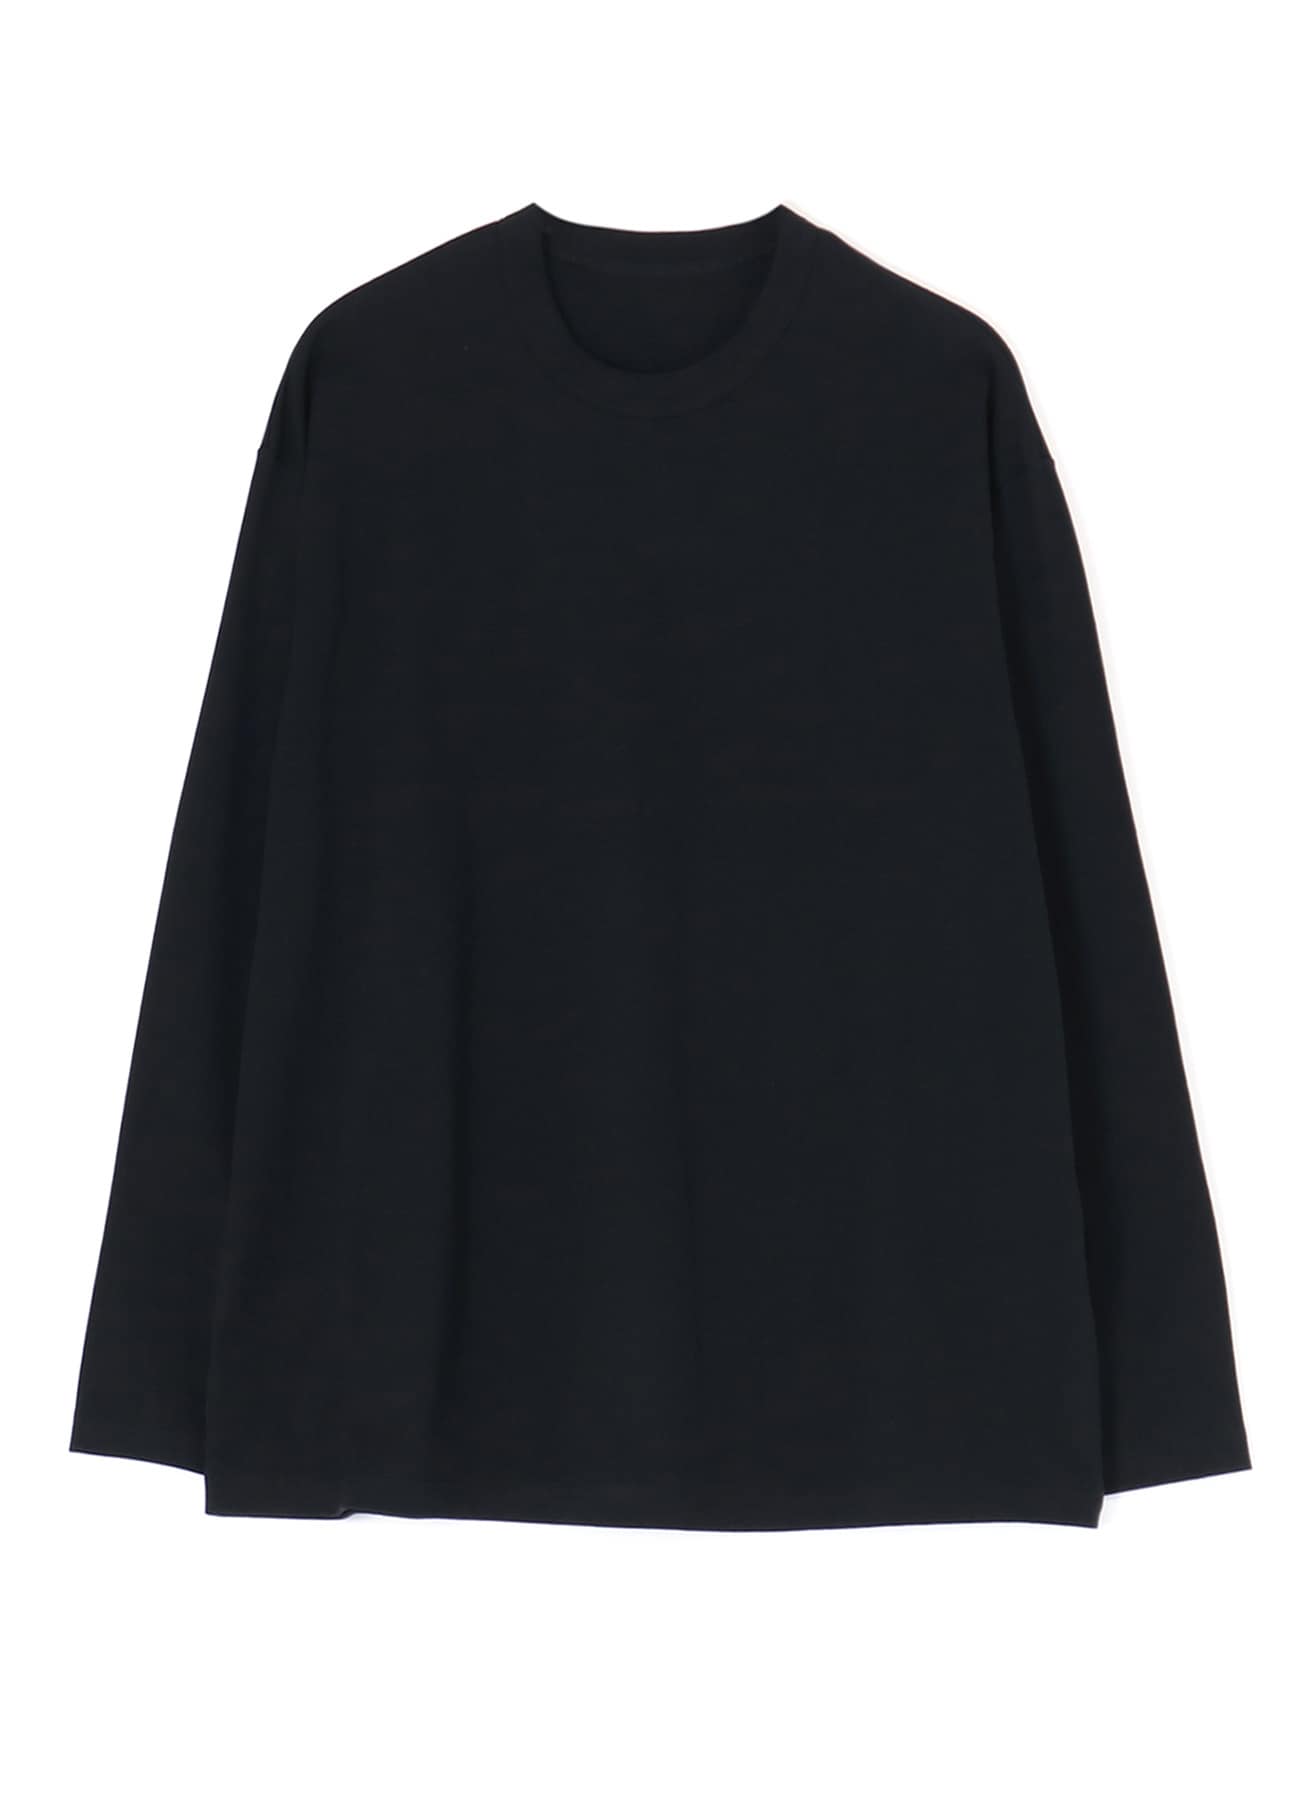 40/2 COTTON JERSEY LONG SLEEVE T-SHIRT (L)(L Black): Y's for